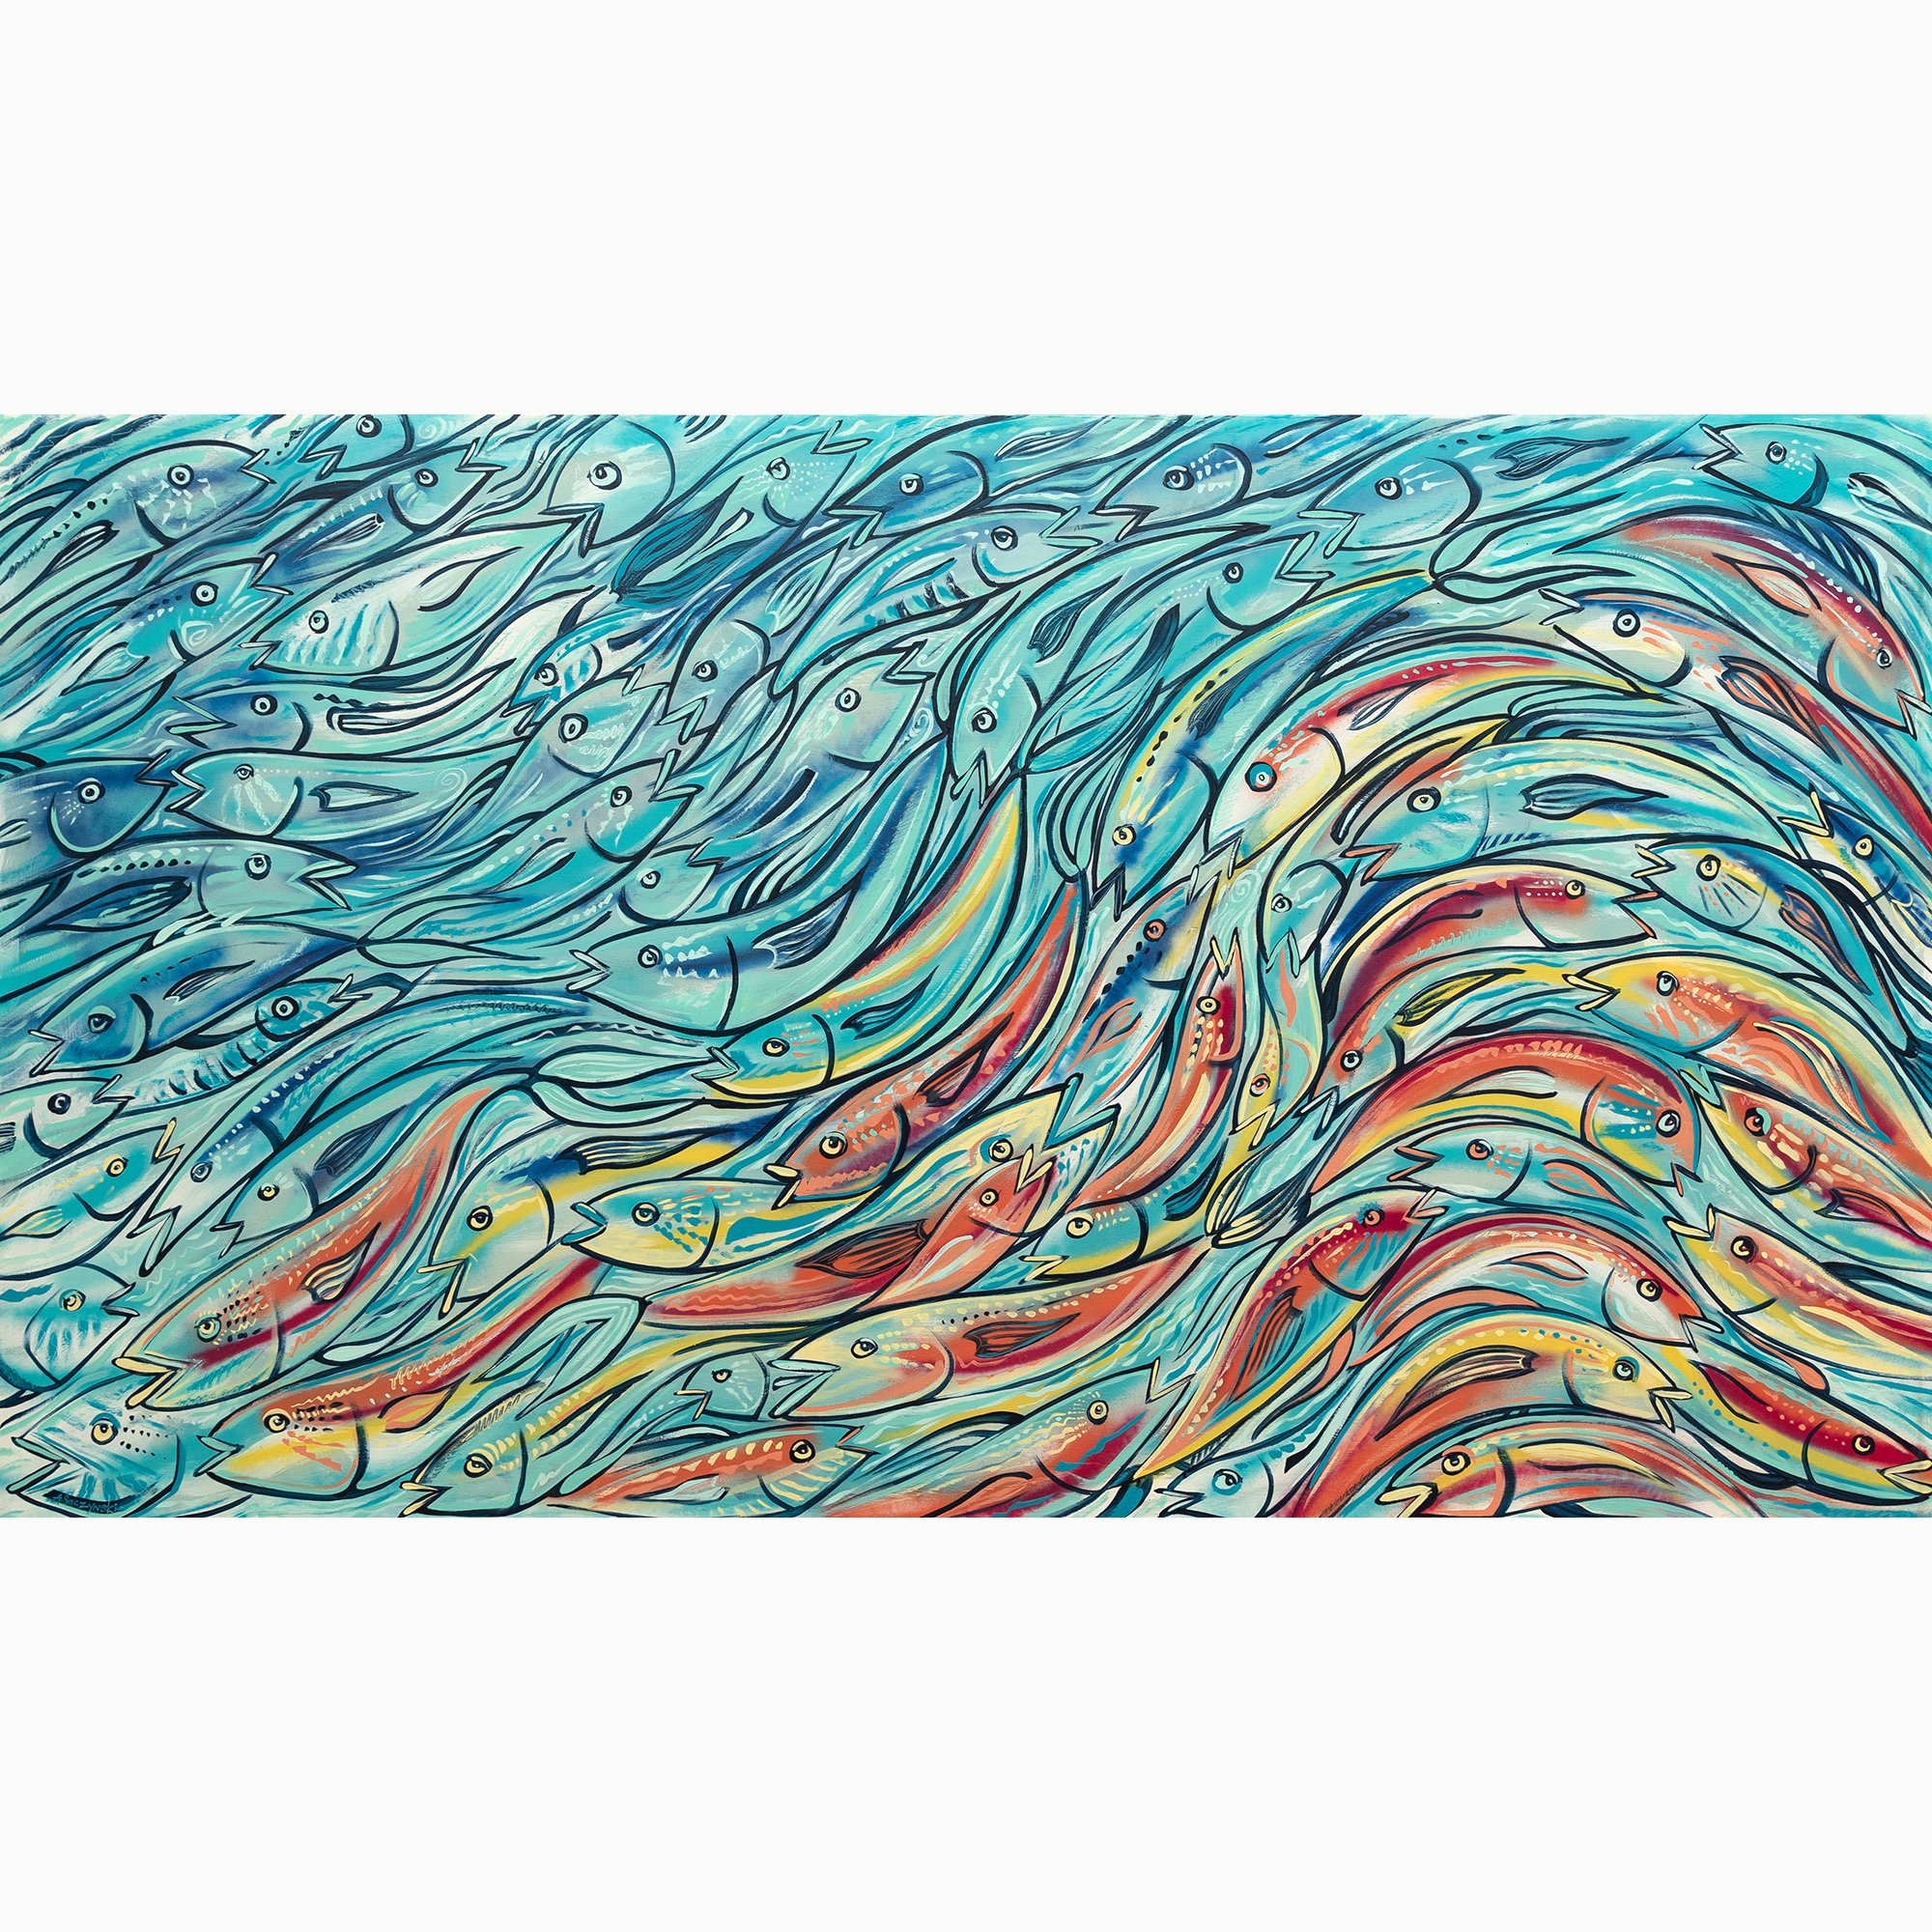 Fading Fish Swell | 84x48 | 2021